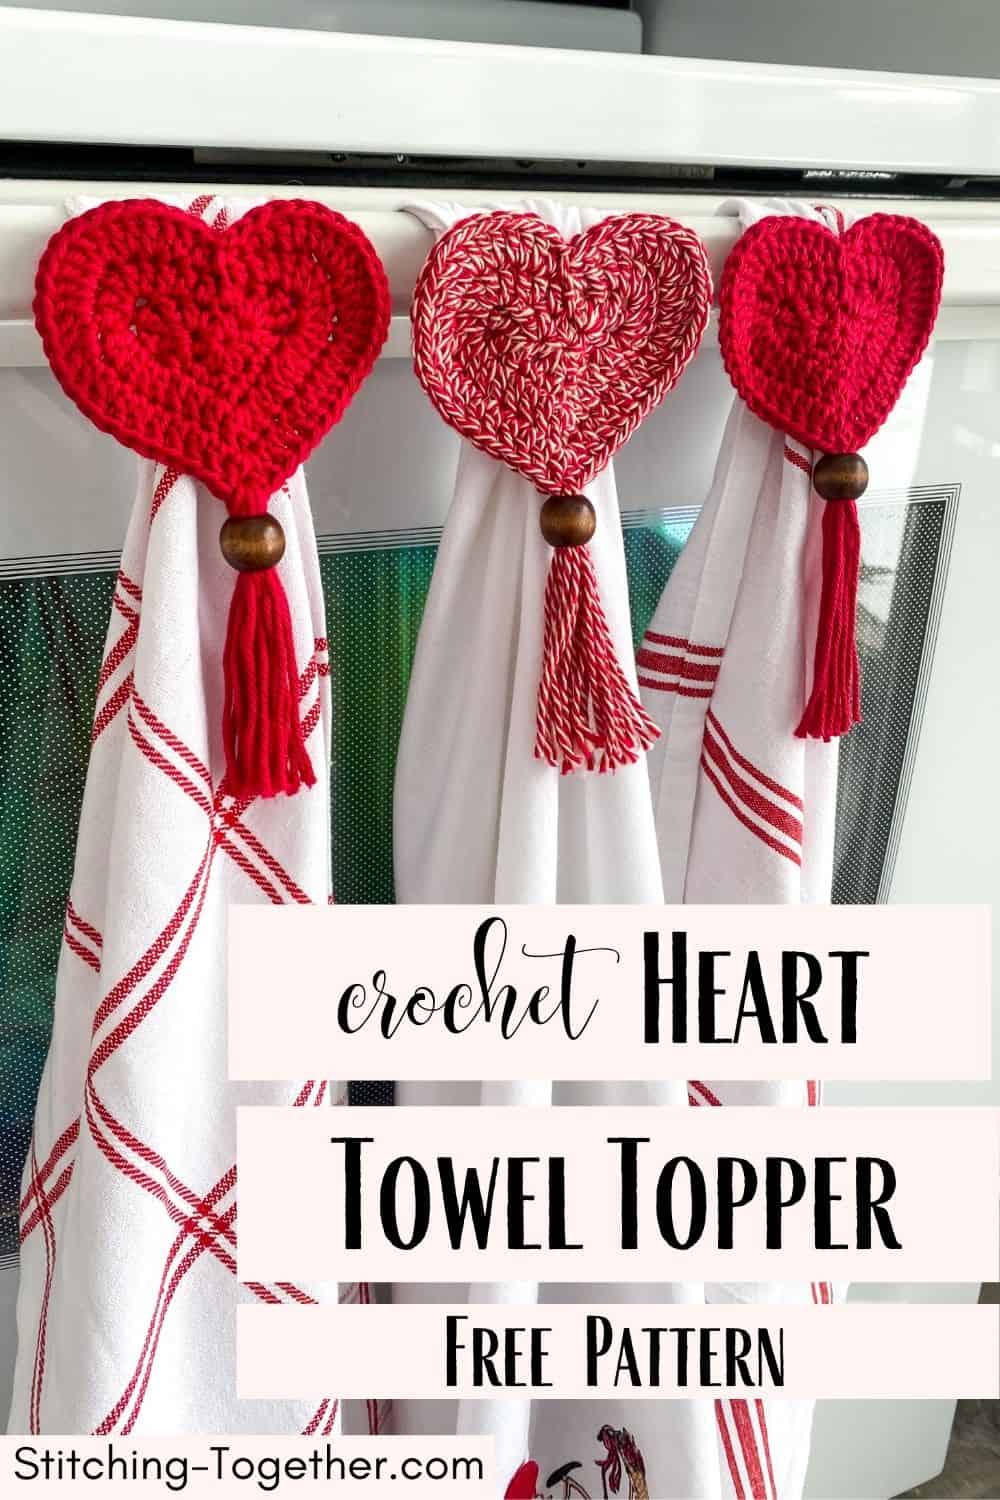 graphic saying crochet heart towel topper free pattern and image of heart towel toppers